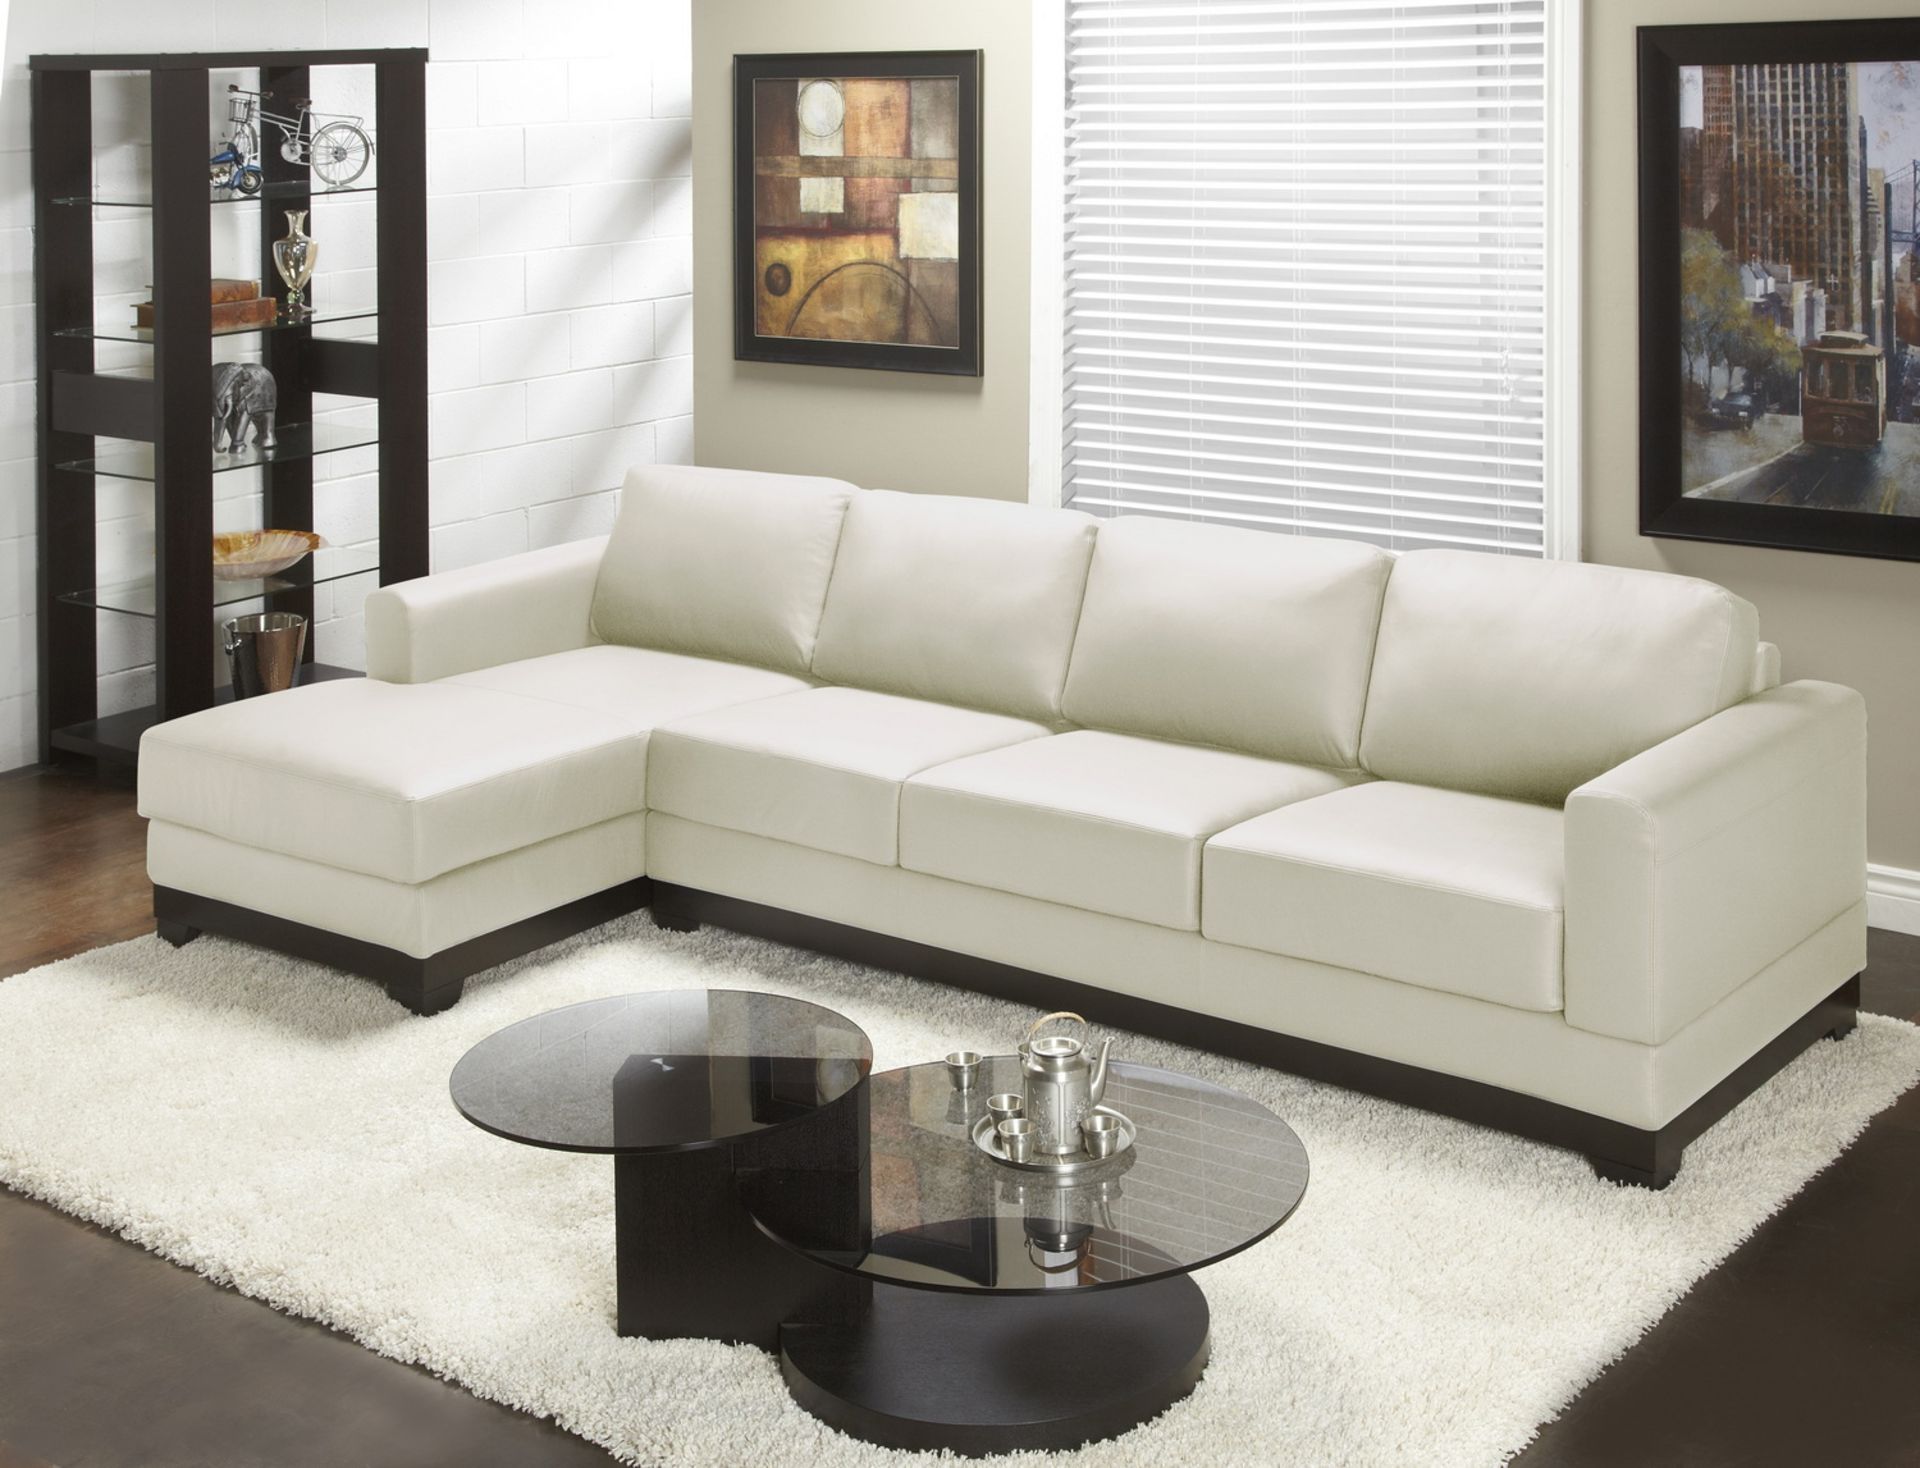 VENICE WHITE 100% GENUINE LEATHER SECTIONAL SOFA W/ CHAISE LOUNGER - 119" (#976) (CANADIAN MADE)